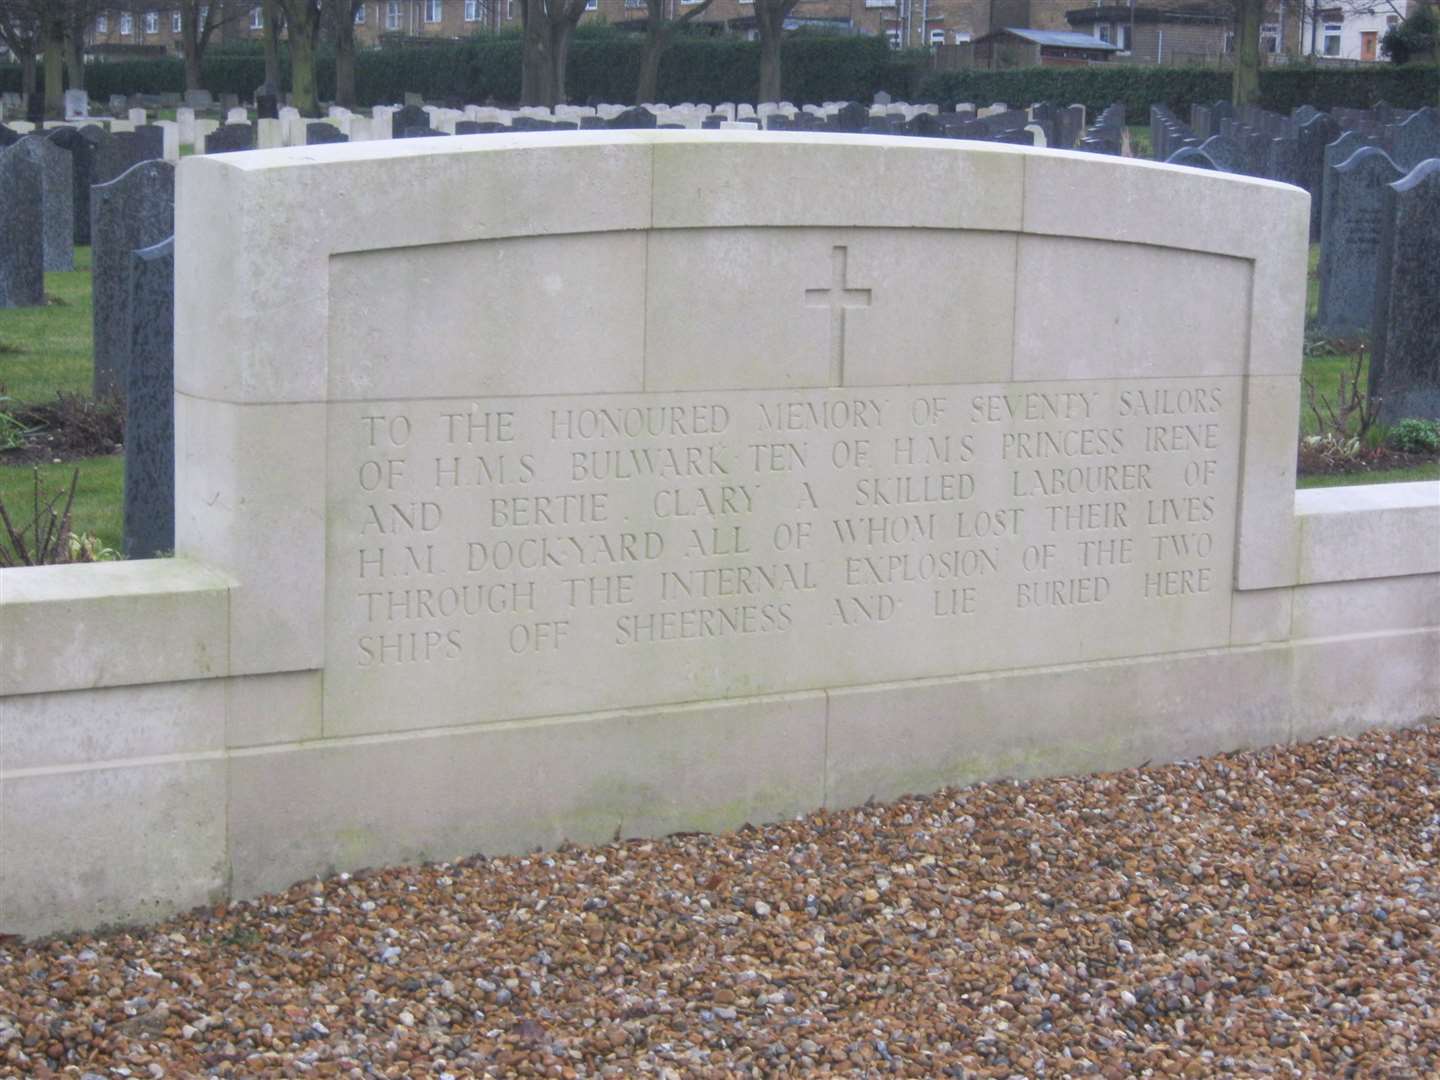 This mass grave in Woodlands Cemetery, Gillingham, holds bodies of men who died in the Princess Irene disaster as well as those from HMS Bulwark